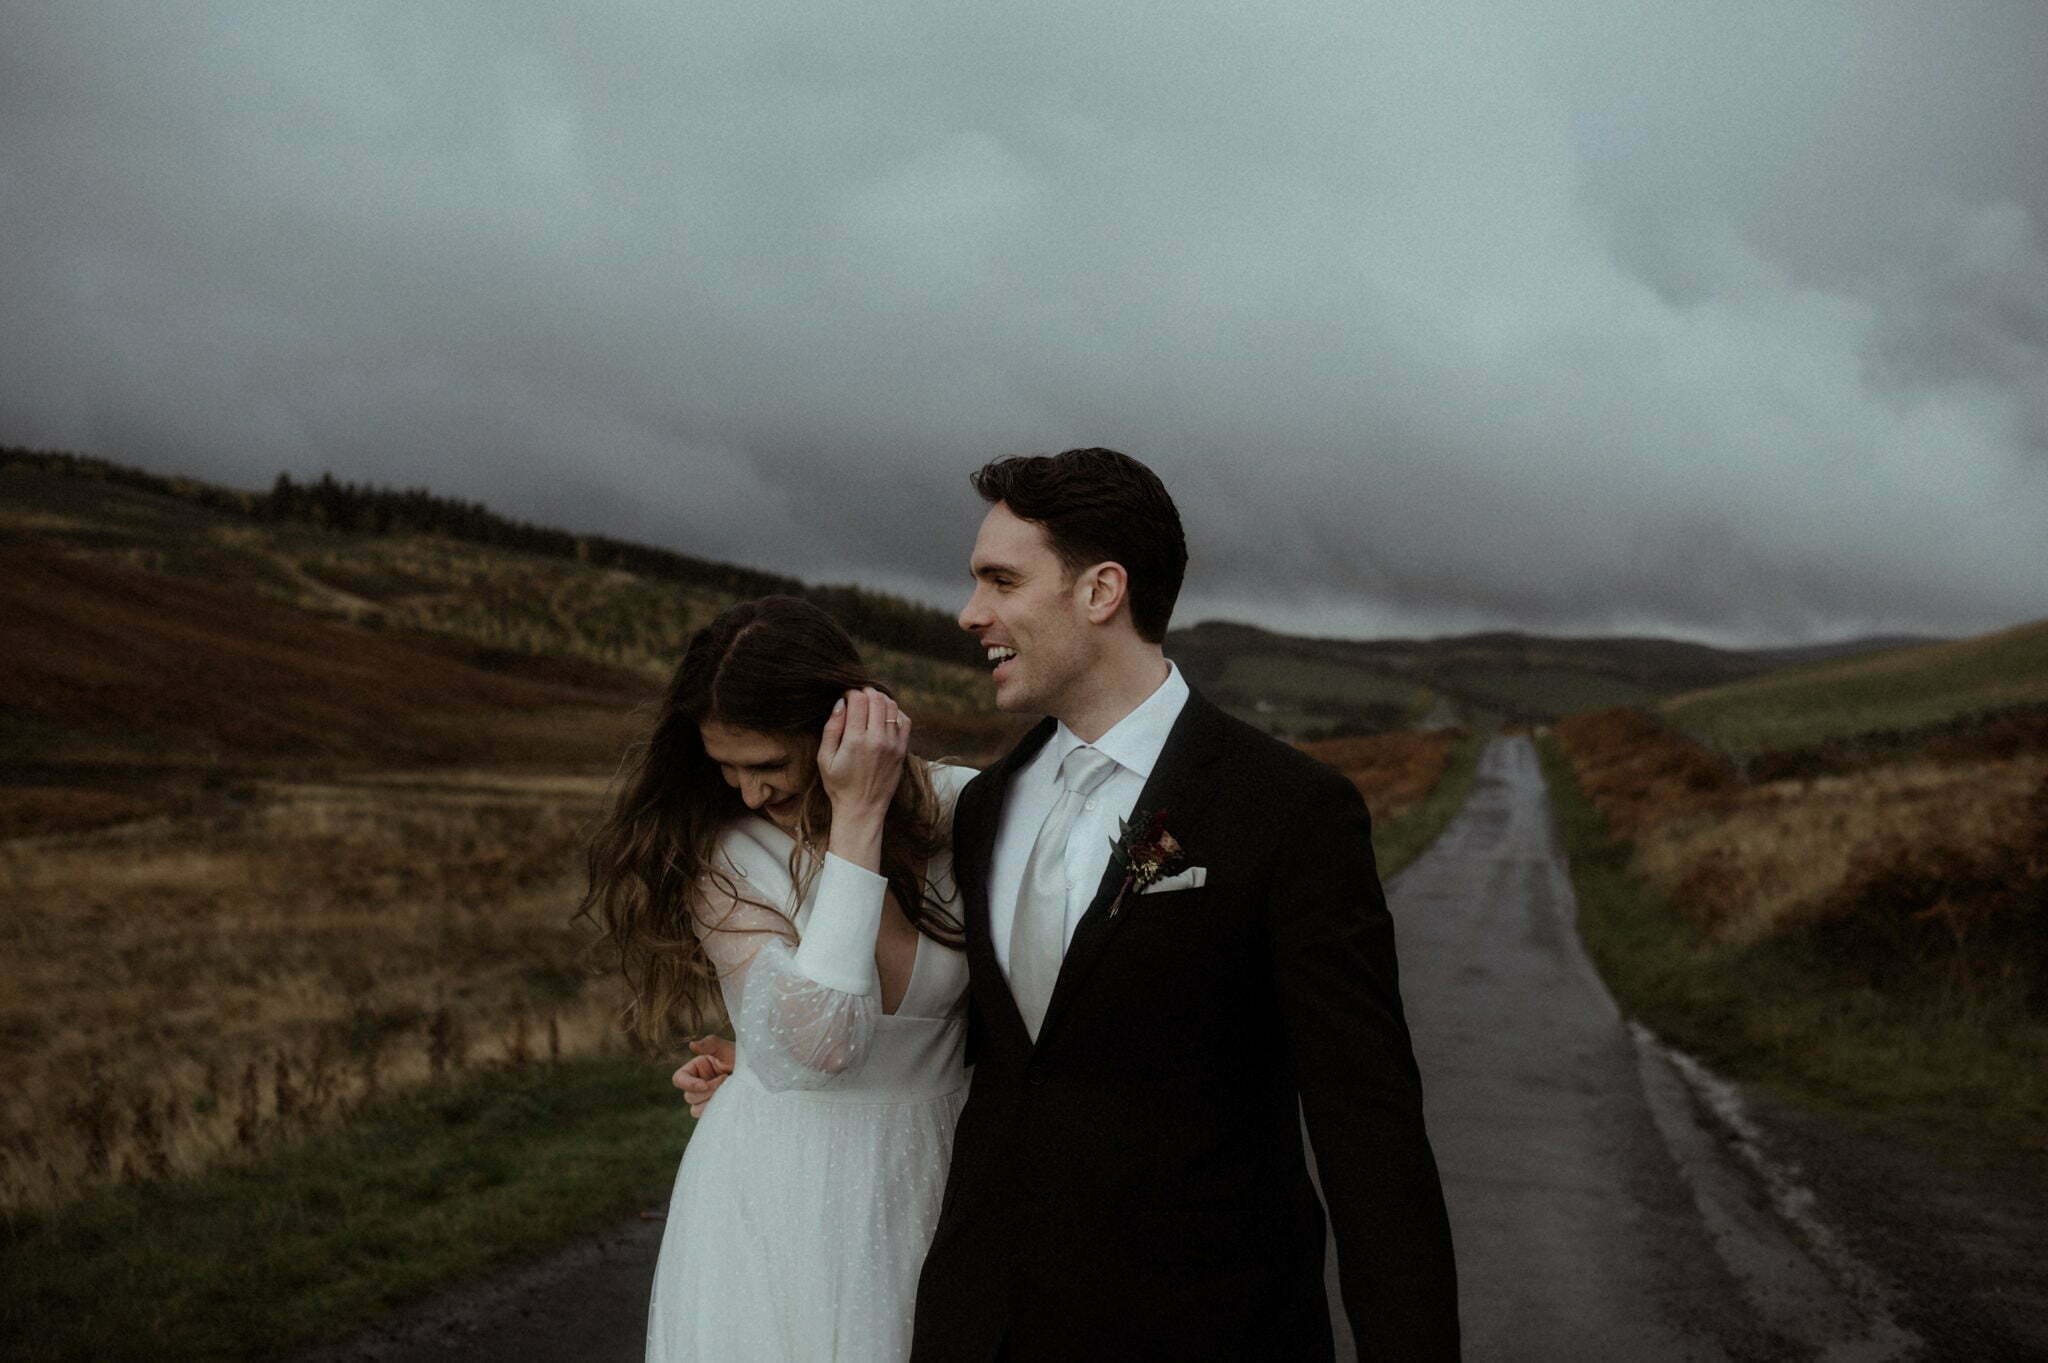 scotland elopement in the scottish borders couple dancing on the road with hills and trees behind